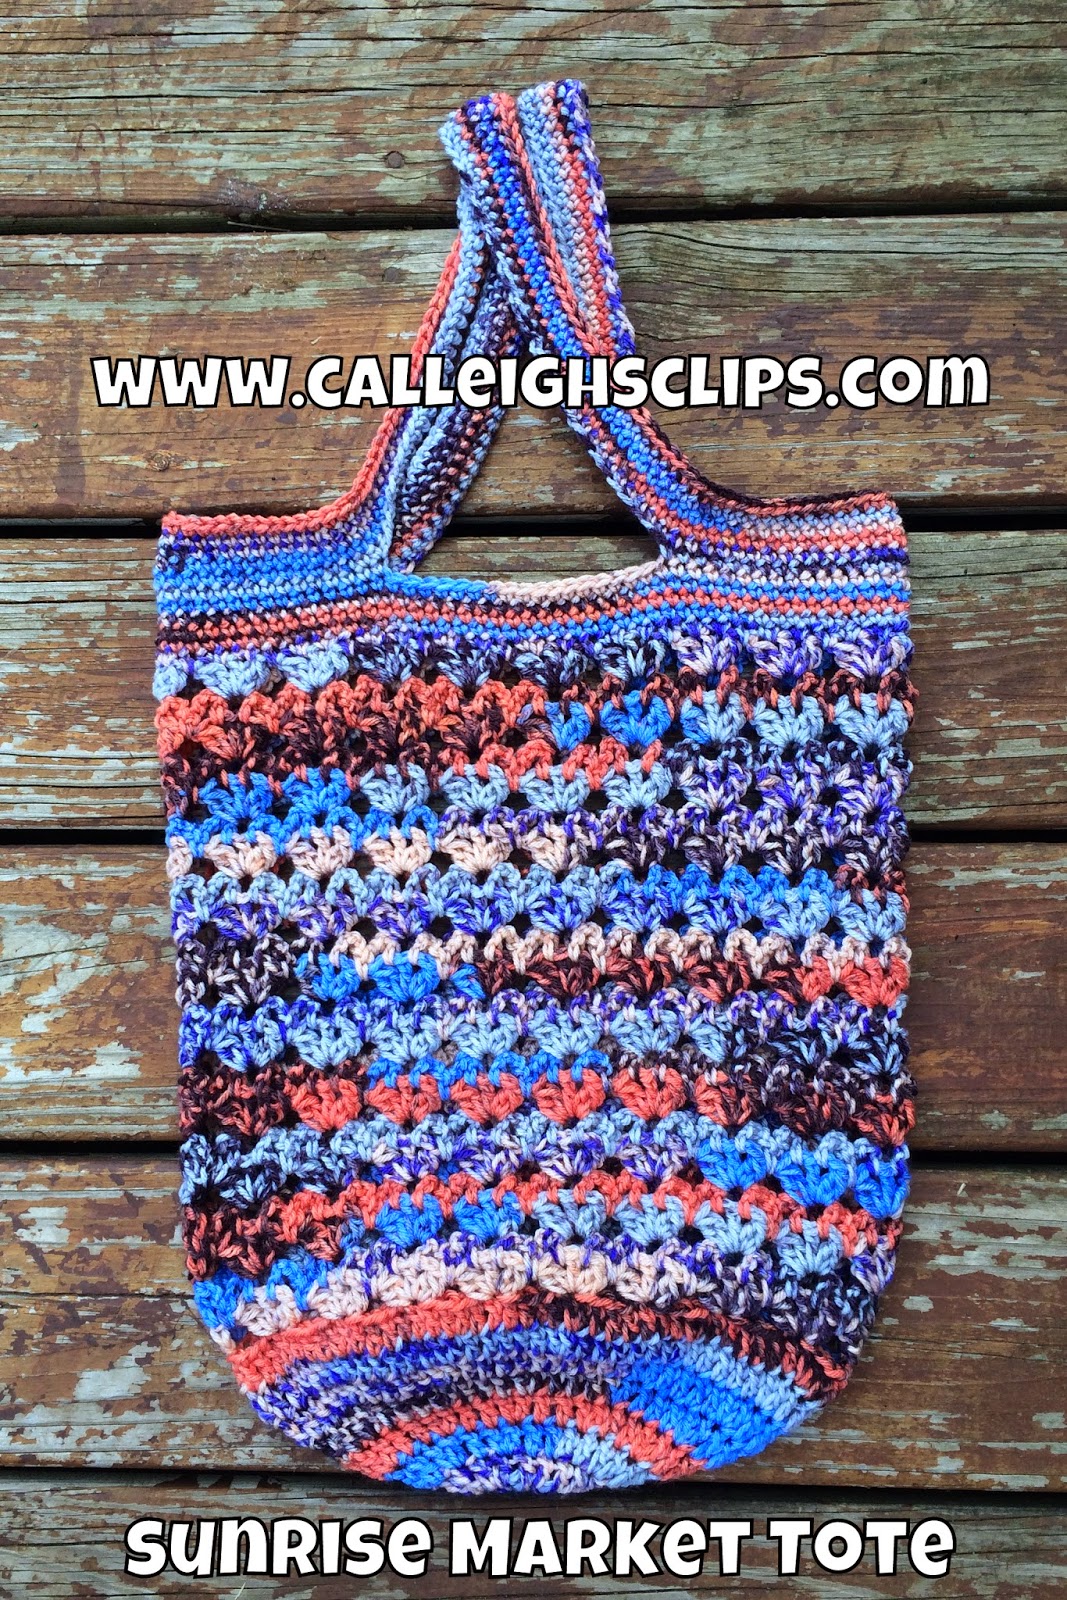 Calleigh's Clips & Crochet Creations: Sunrise Market Tote